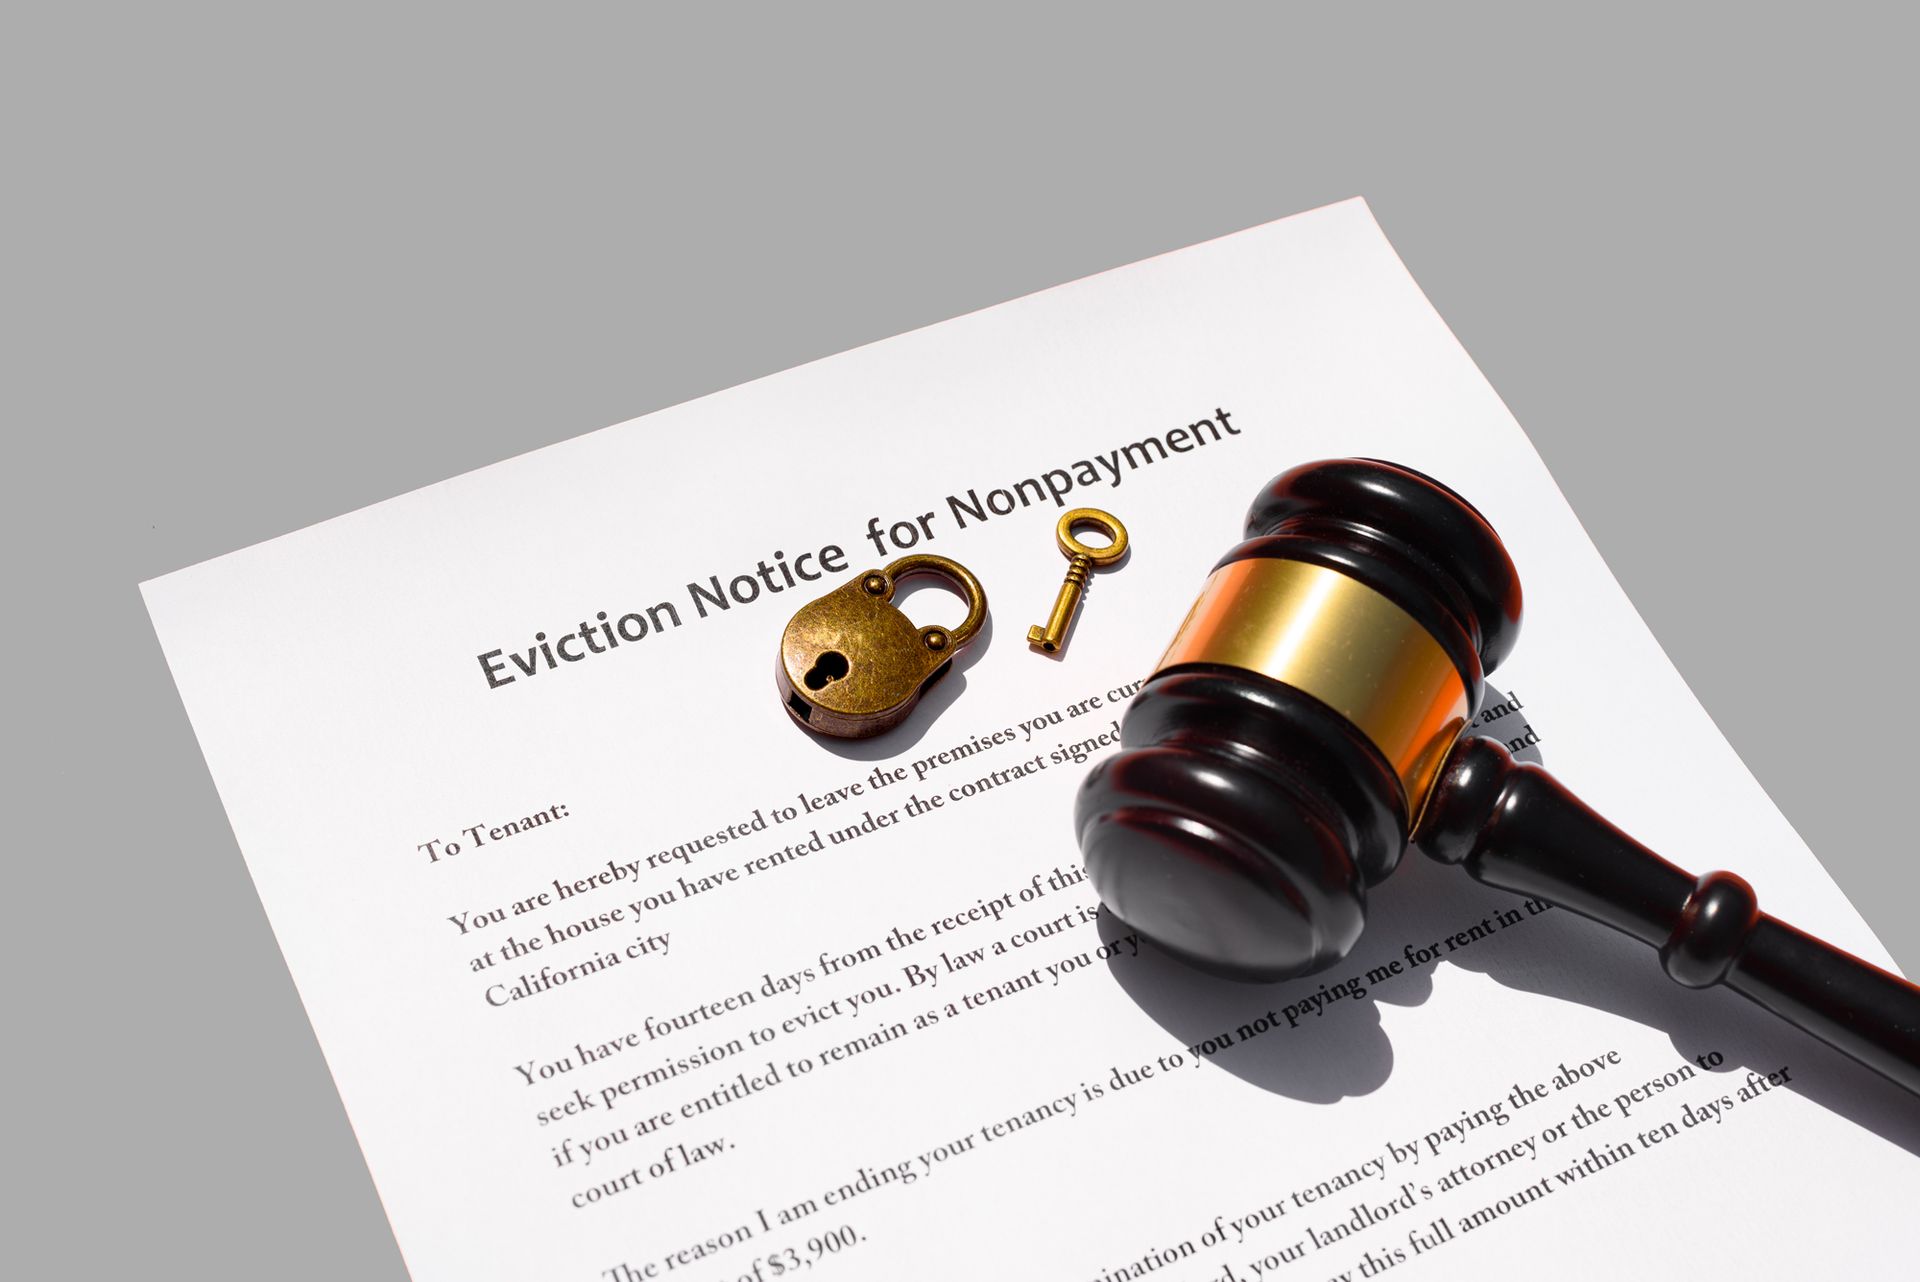 A judge 's gavel is sitting on top of an eviction notice for nonpayment.